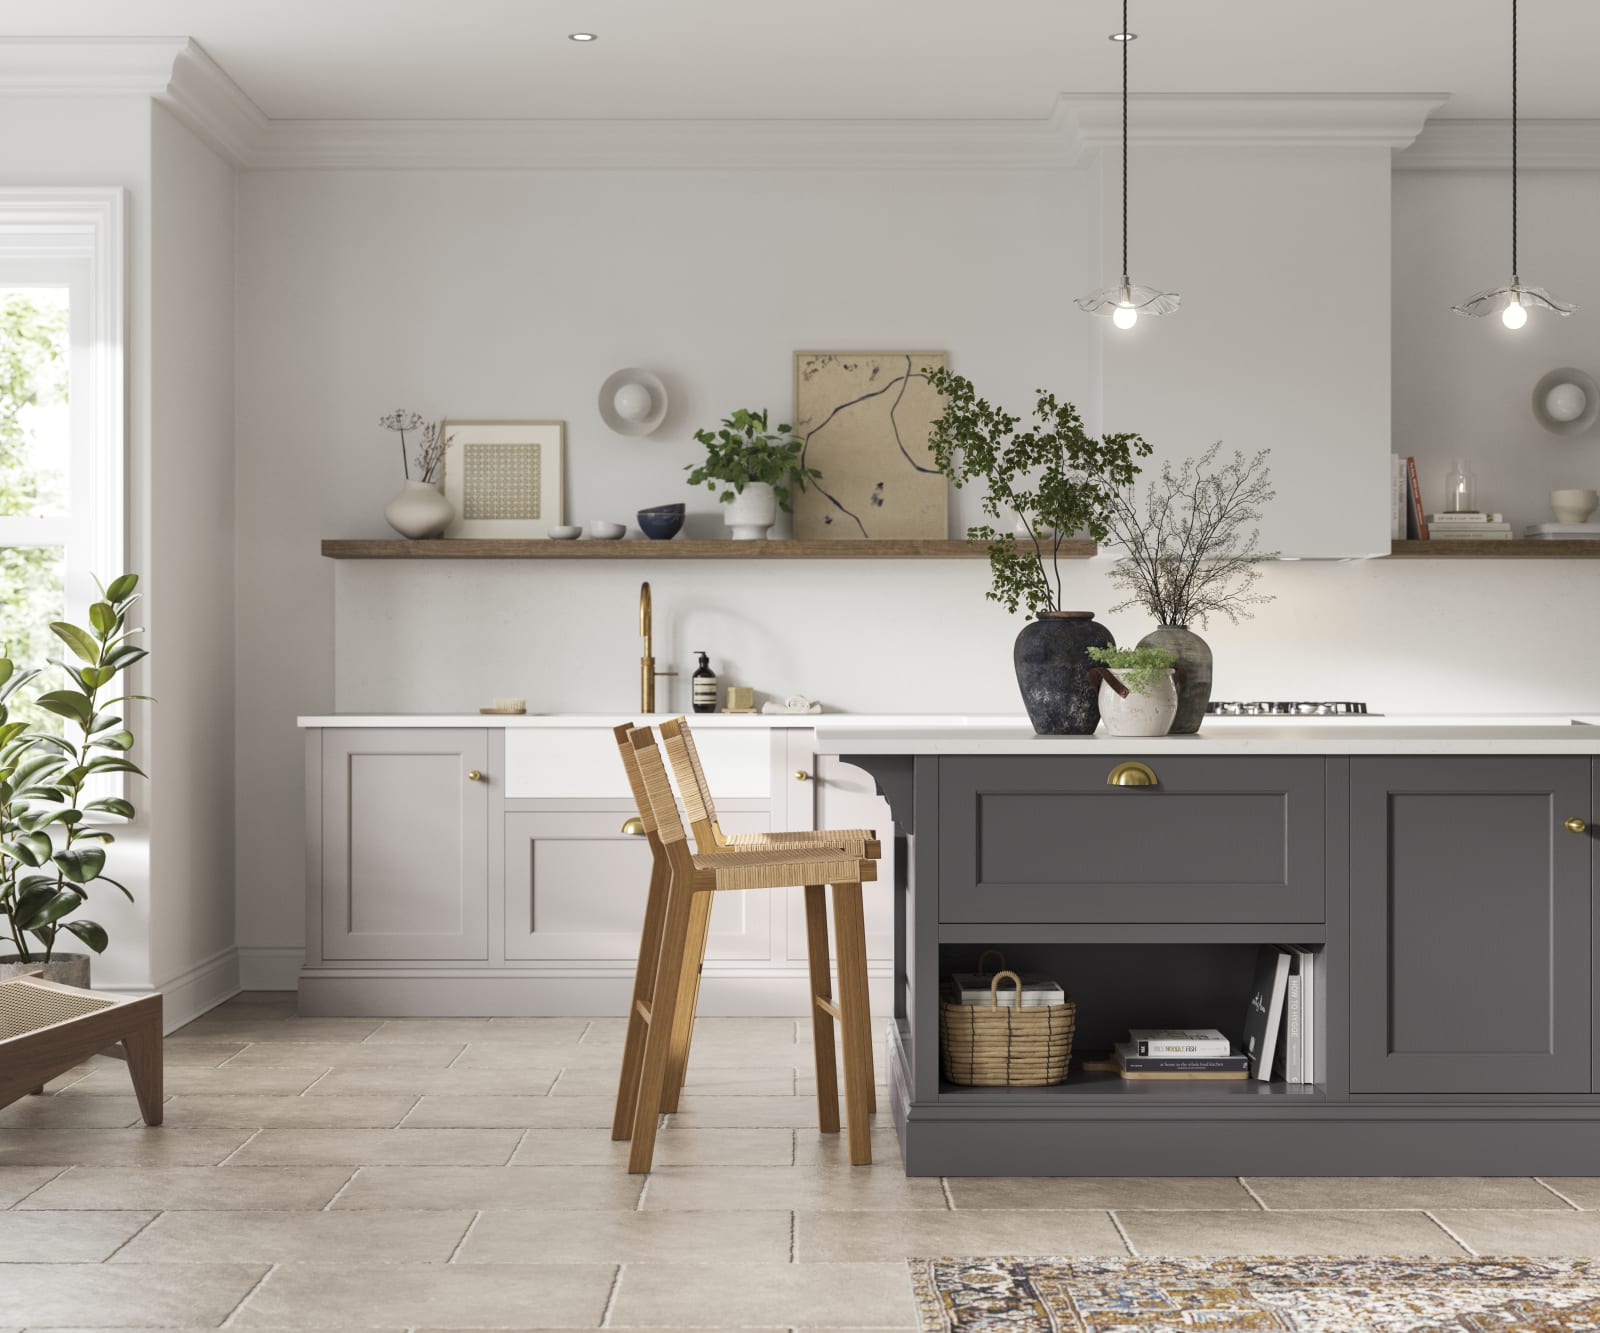 Traditional Shaker-style kitchen range in light shade Cashmere Sweater with a dark grey Charcoals kitchen island.